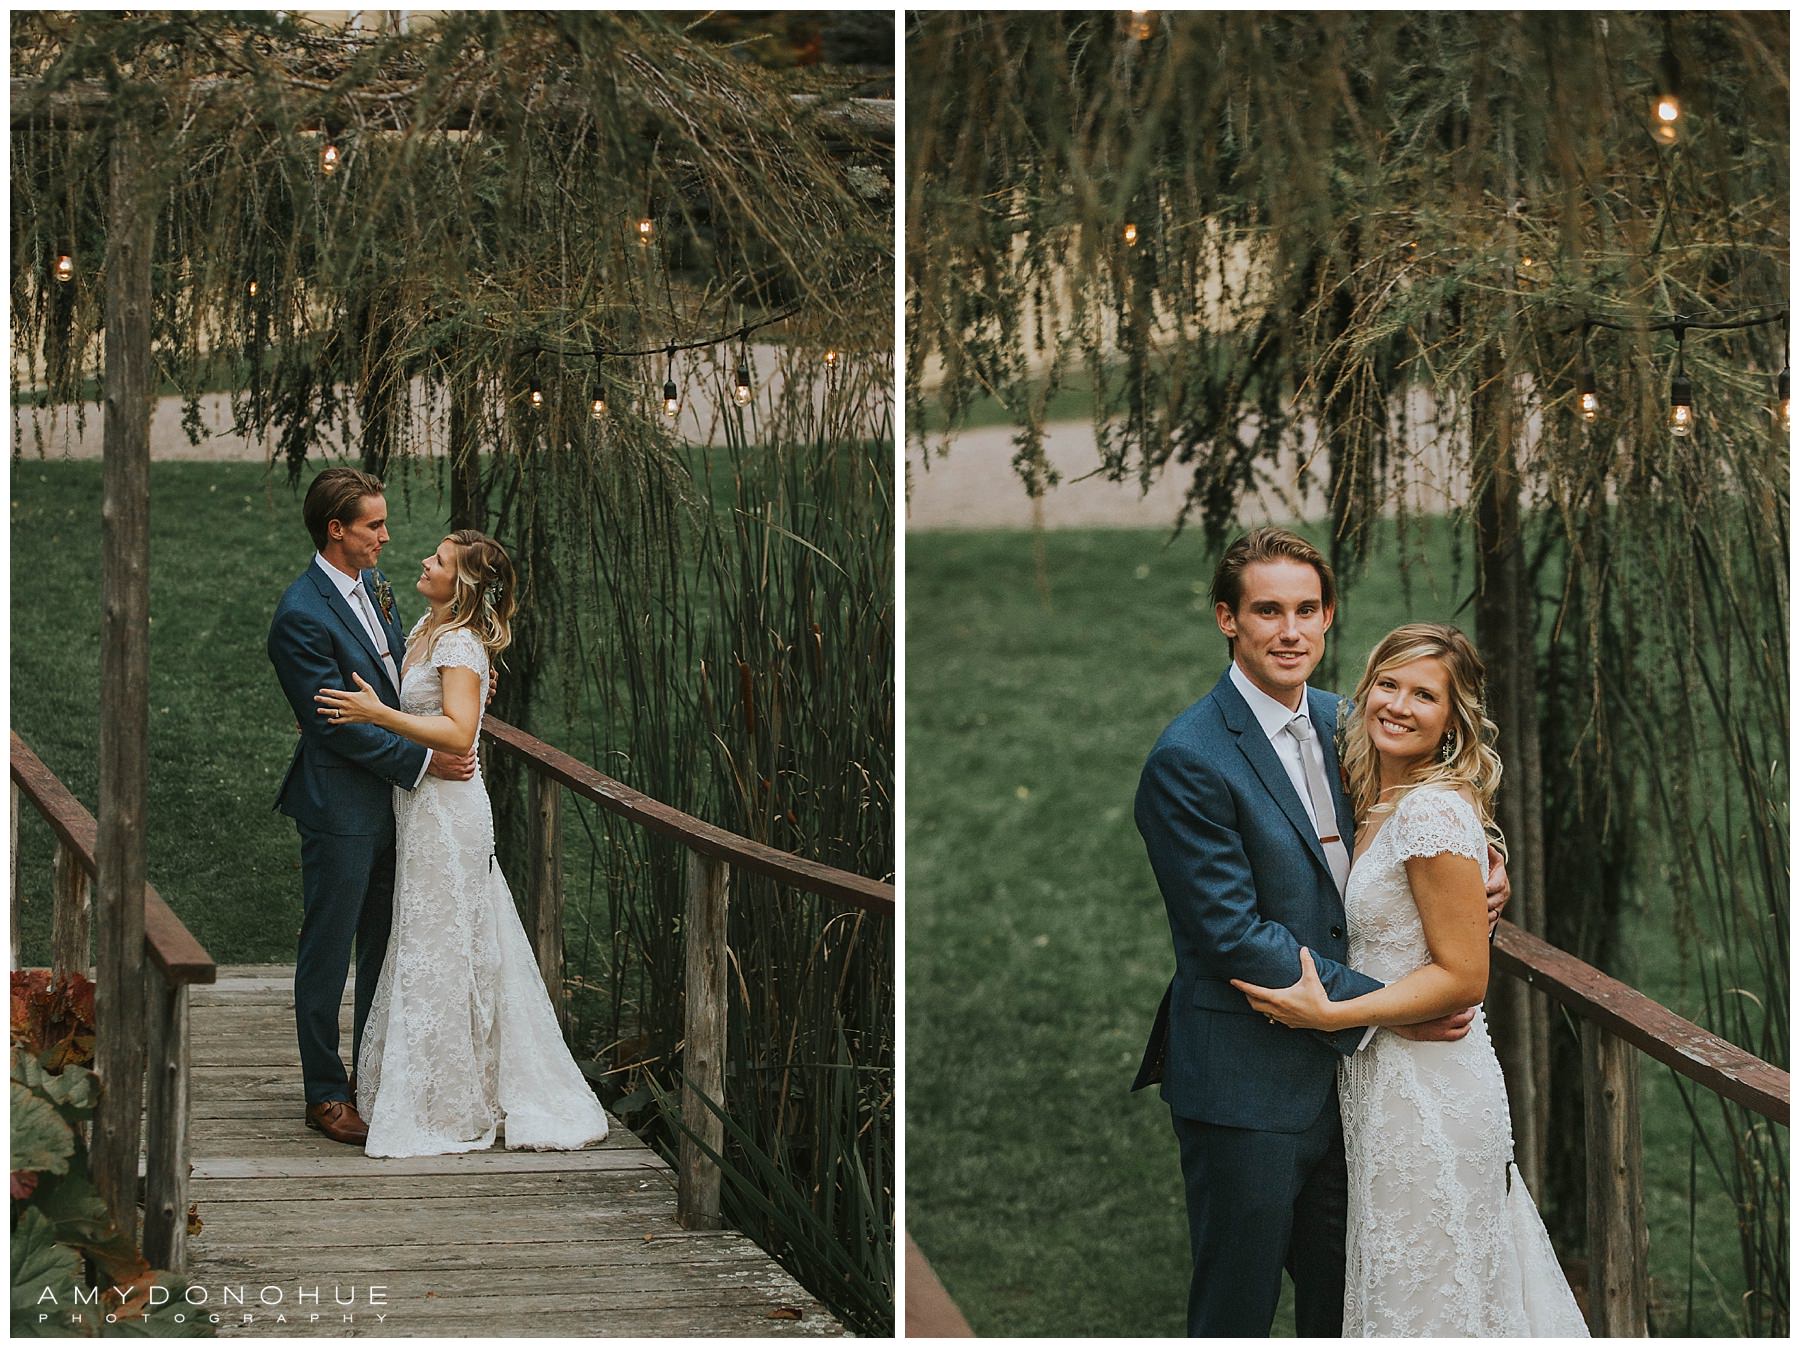 Just Married Portraits | The Inn at Round Barn Farm | © Amy Donohue Photography